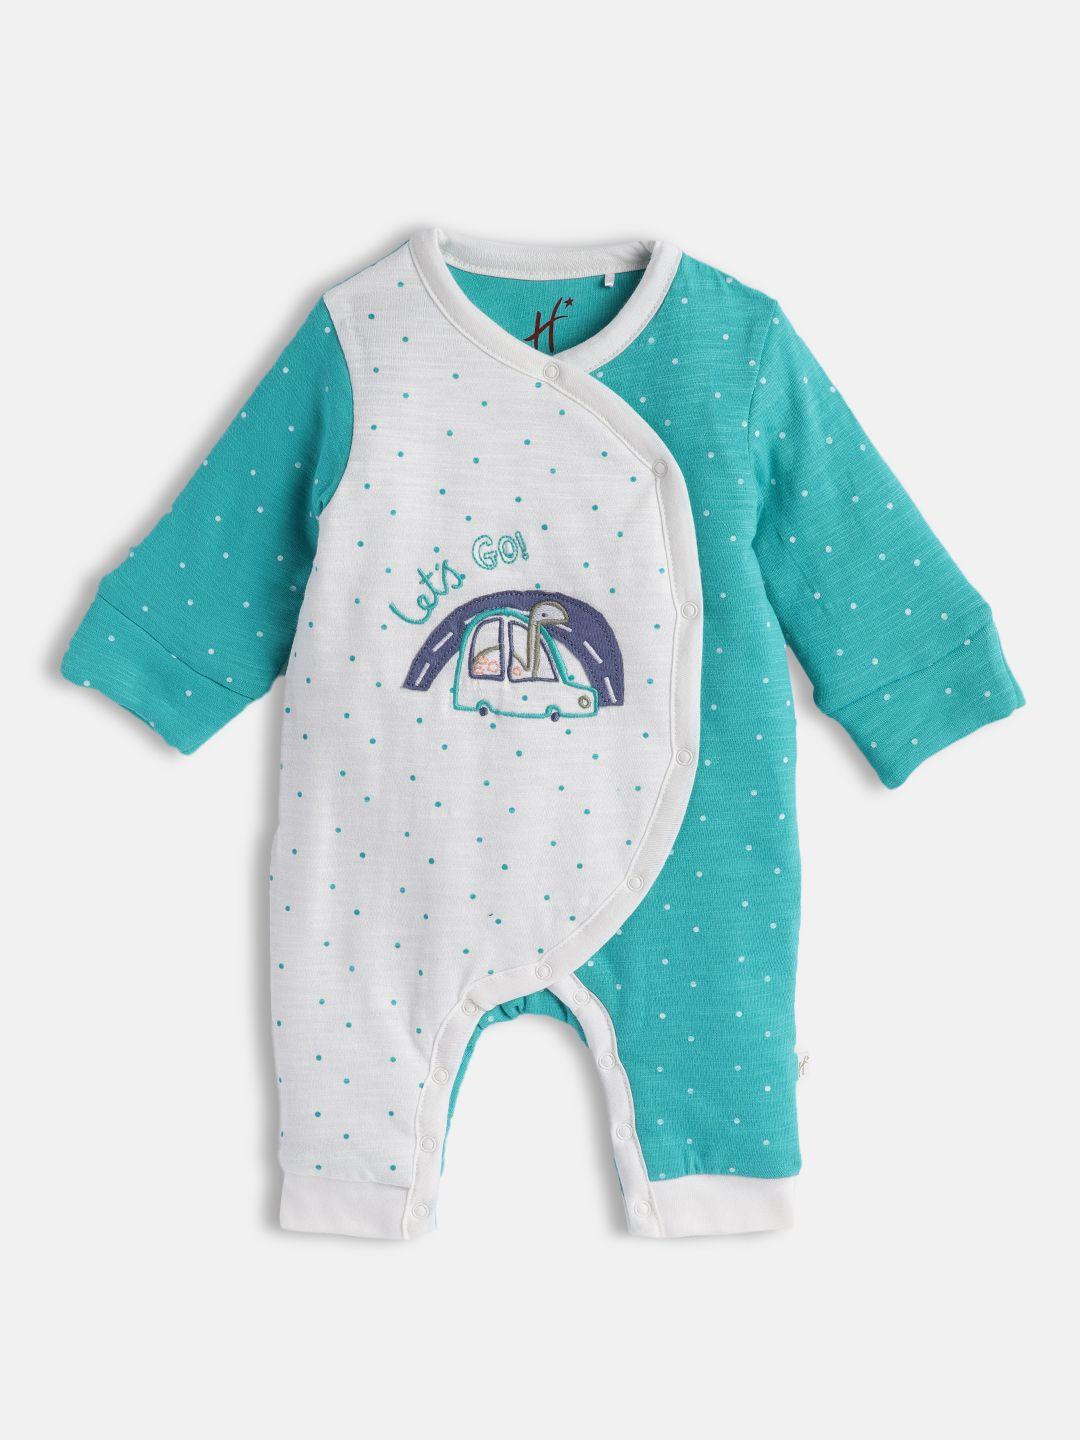 h by hamleys boys turquoise blue & white polka dots print embroidered pure cotton rompers